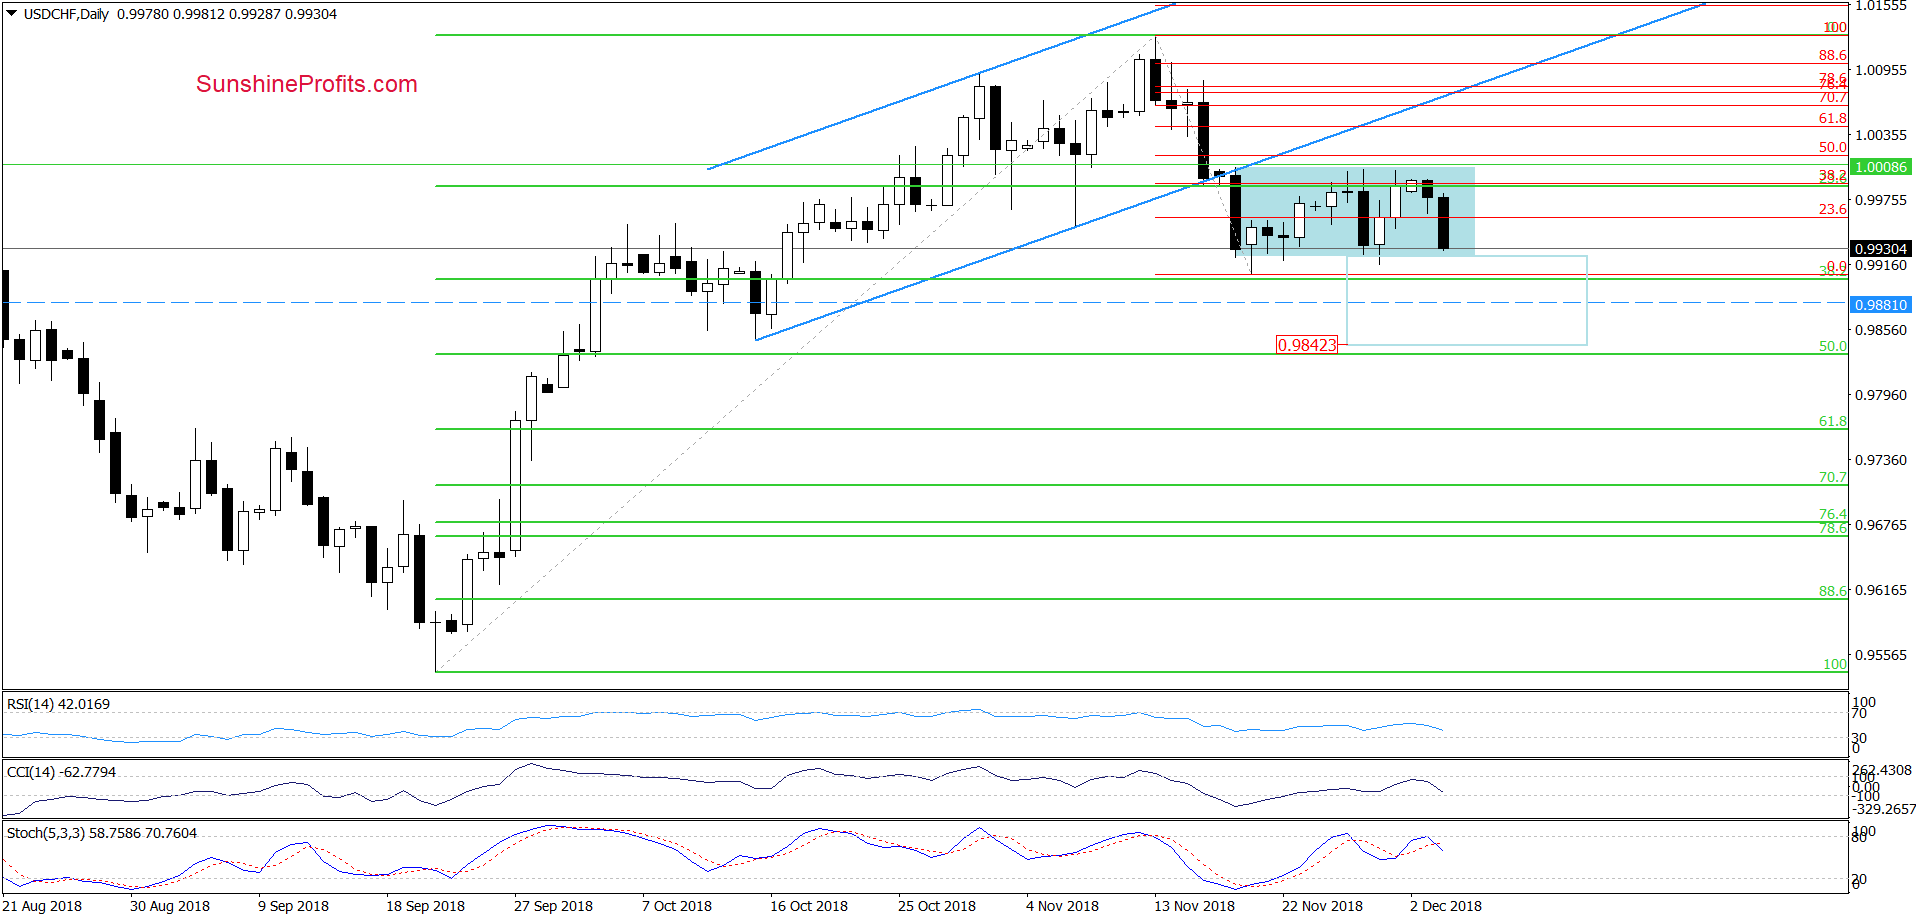 USD/CHF - daily chart